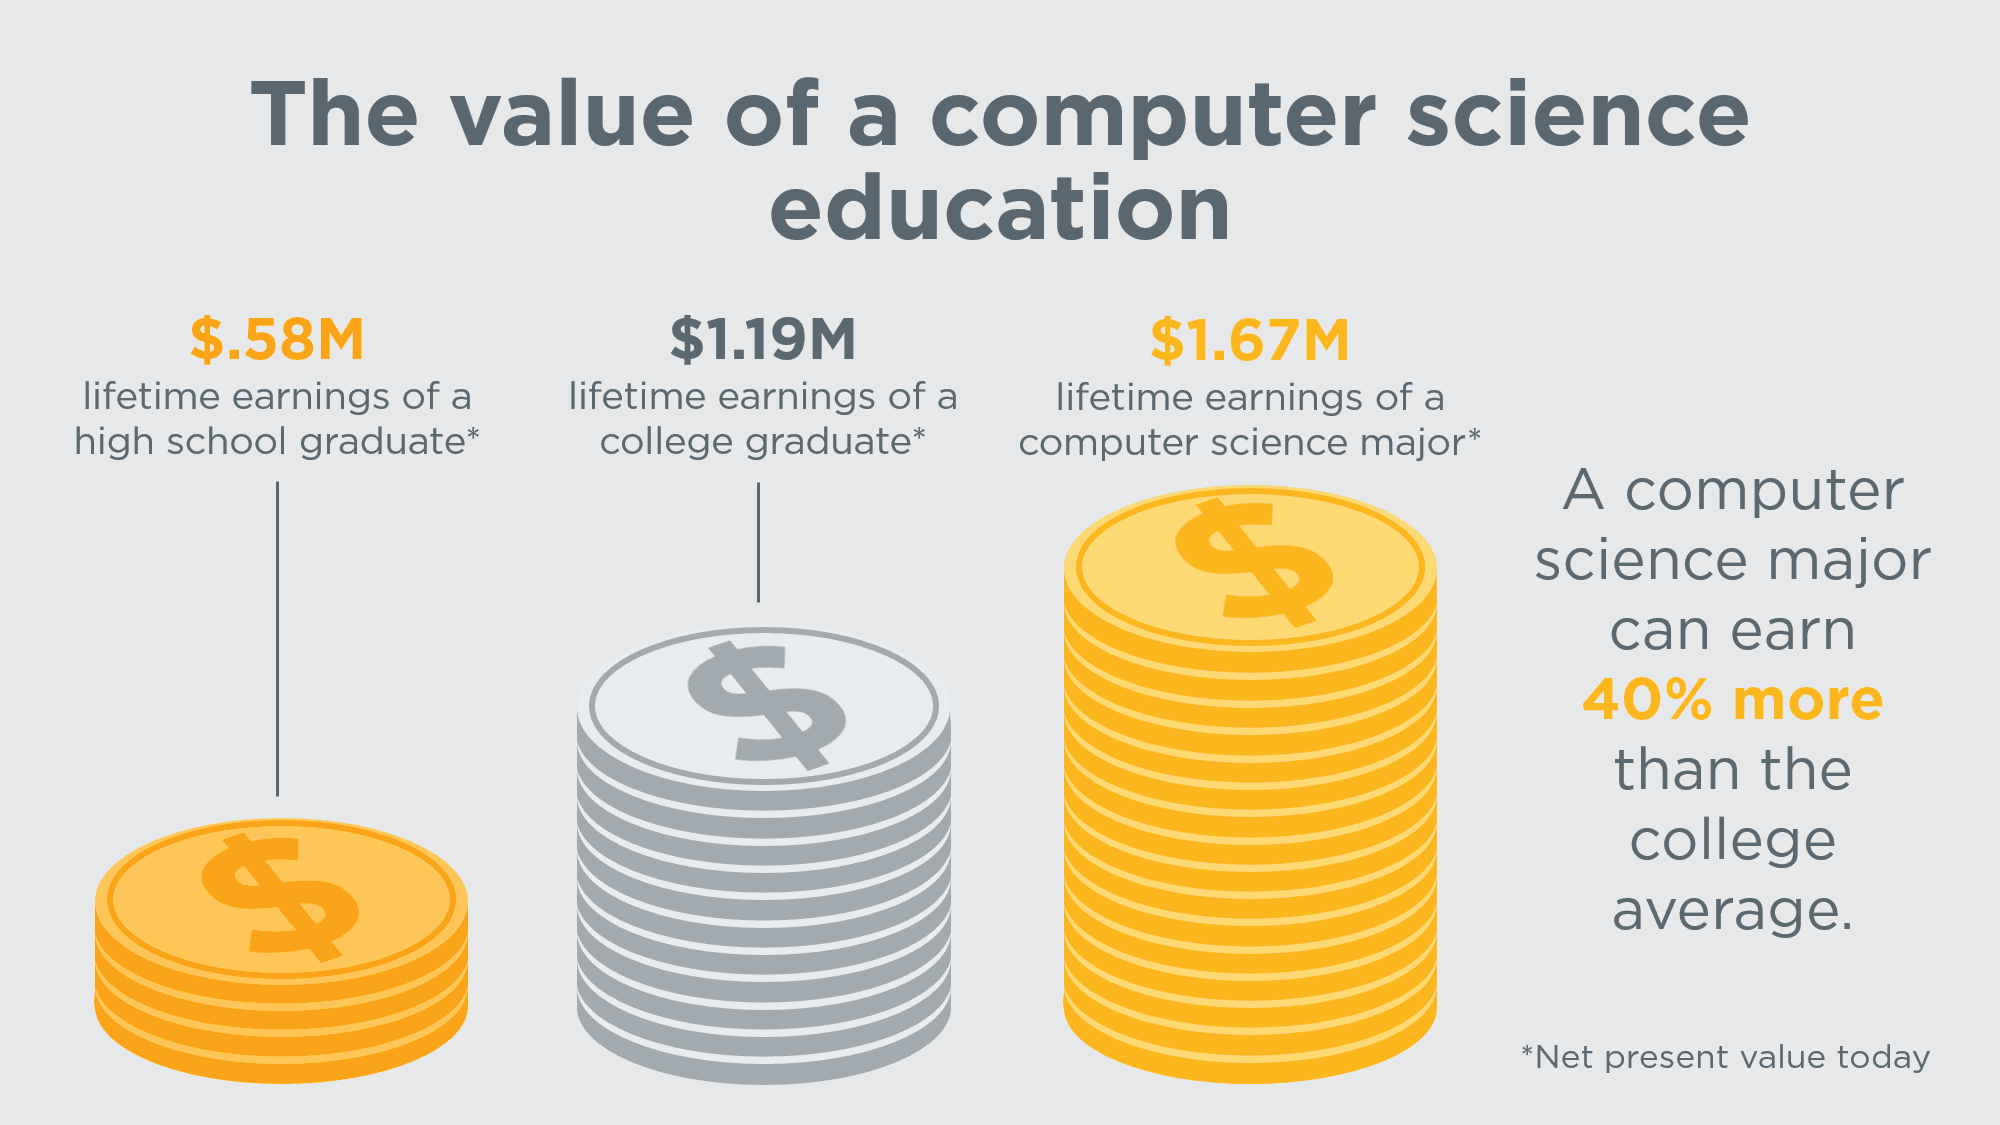 The value of a computer science education